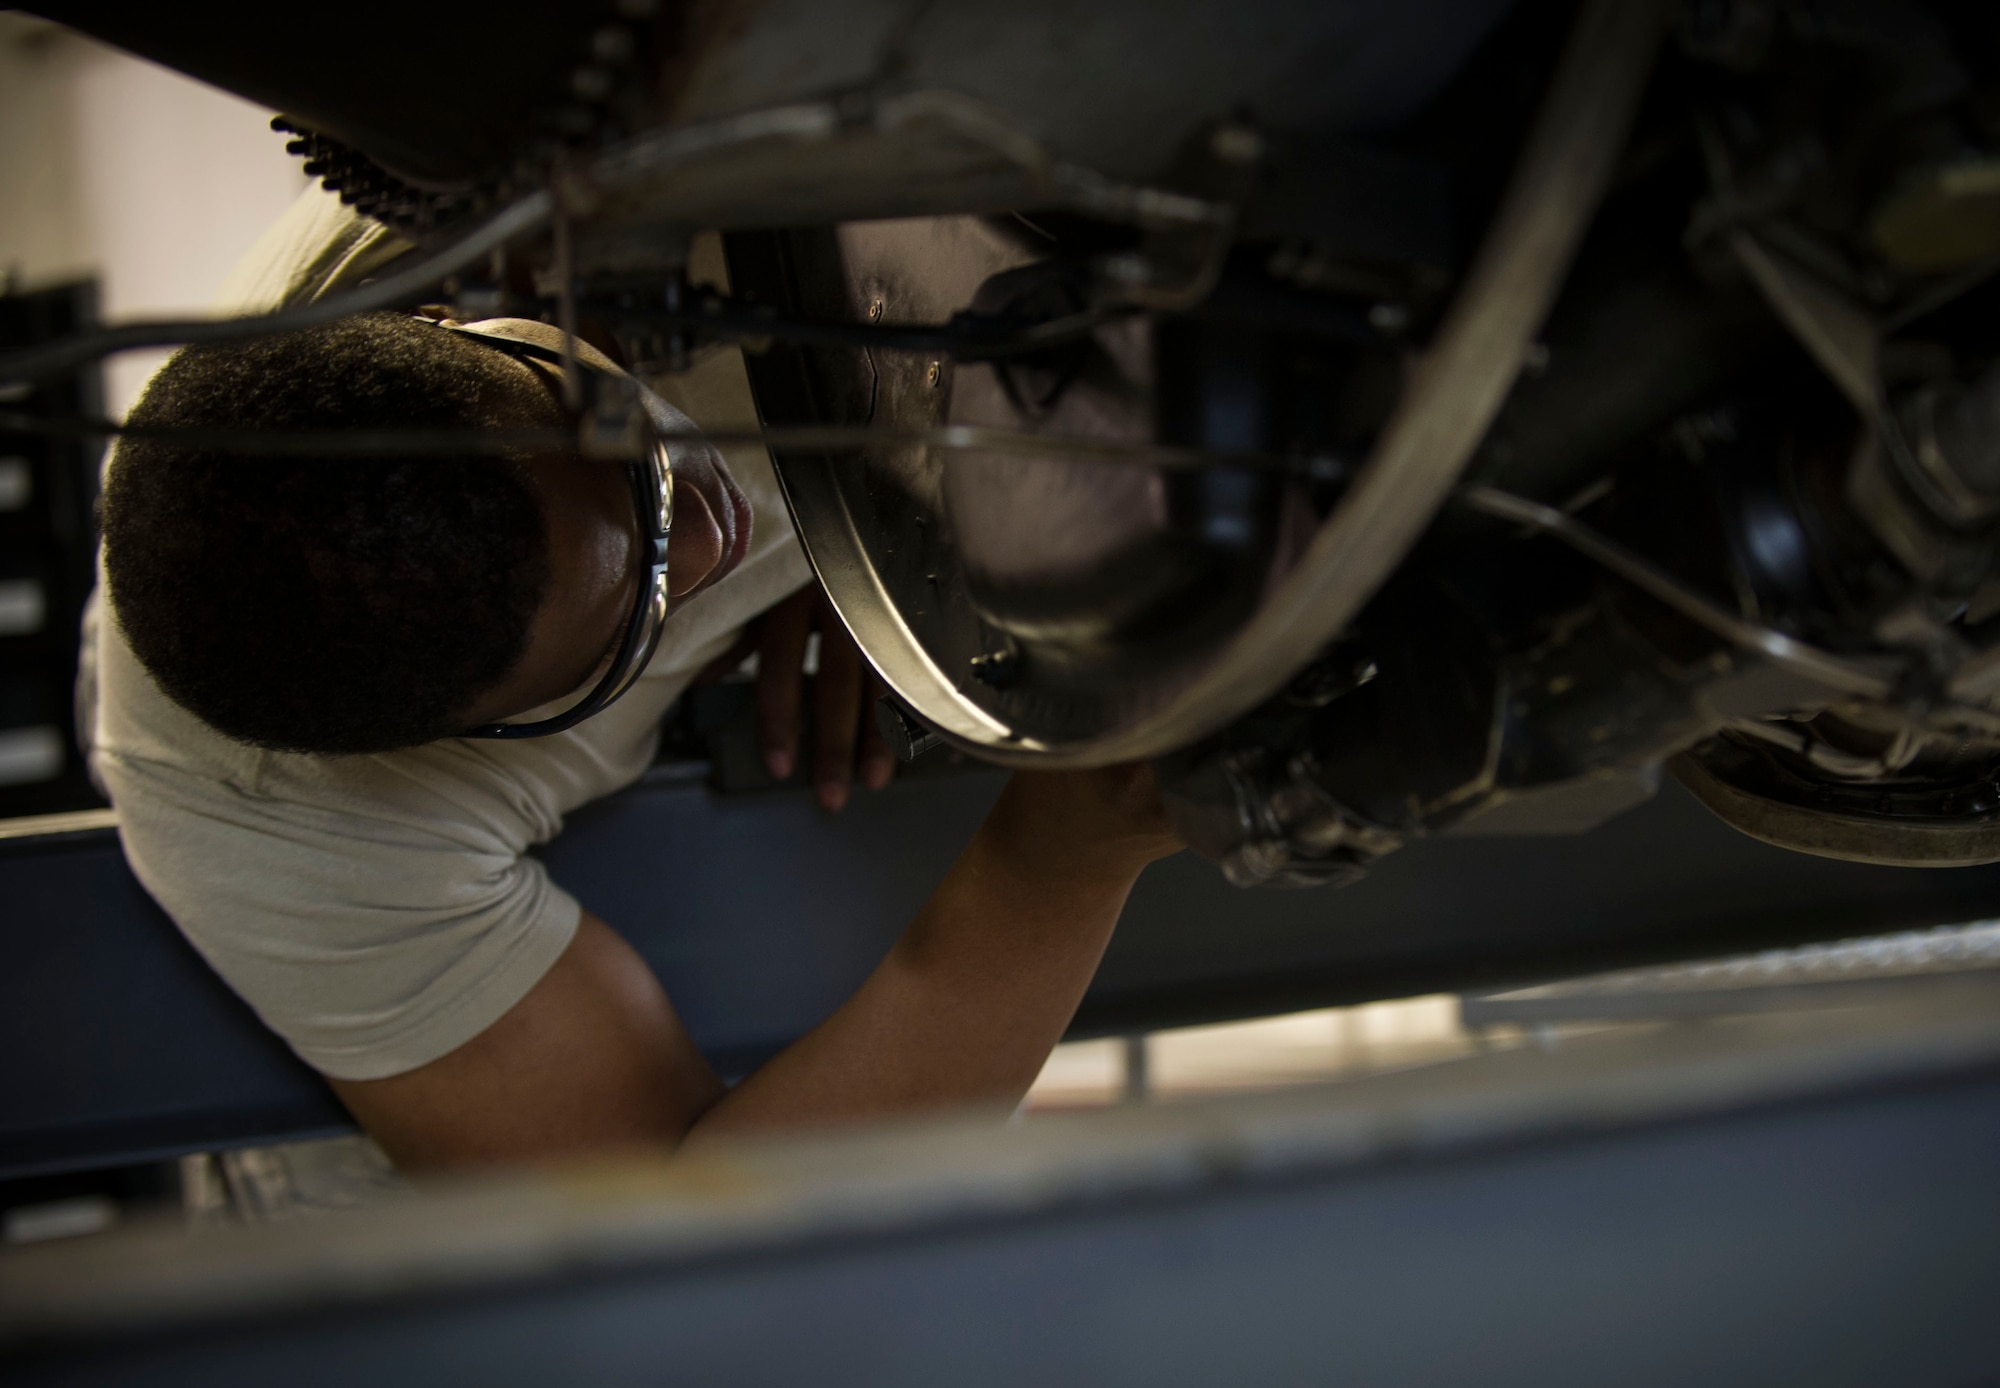 Staff Sgt. Korie Parker, 5th Maintenance Group engine trending and diagnostic monitor, inspects a B-52 combine engine at Minot Air Force Base, N.D., July 5, 2016. ET&D monitors are responsible for maintaining over 200 engines at Minot AFB. (U.S. Air Force photo/Senior Airman Apryl Hall)